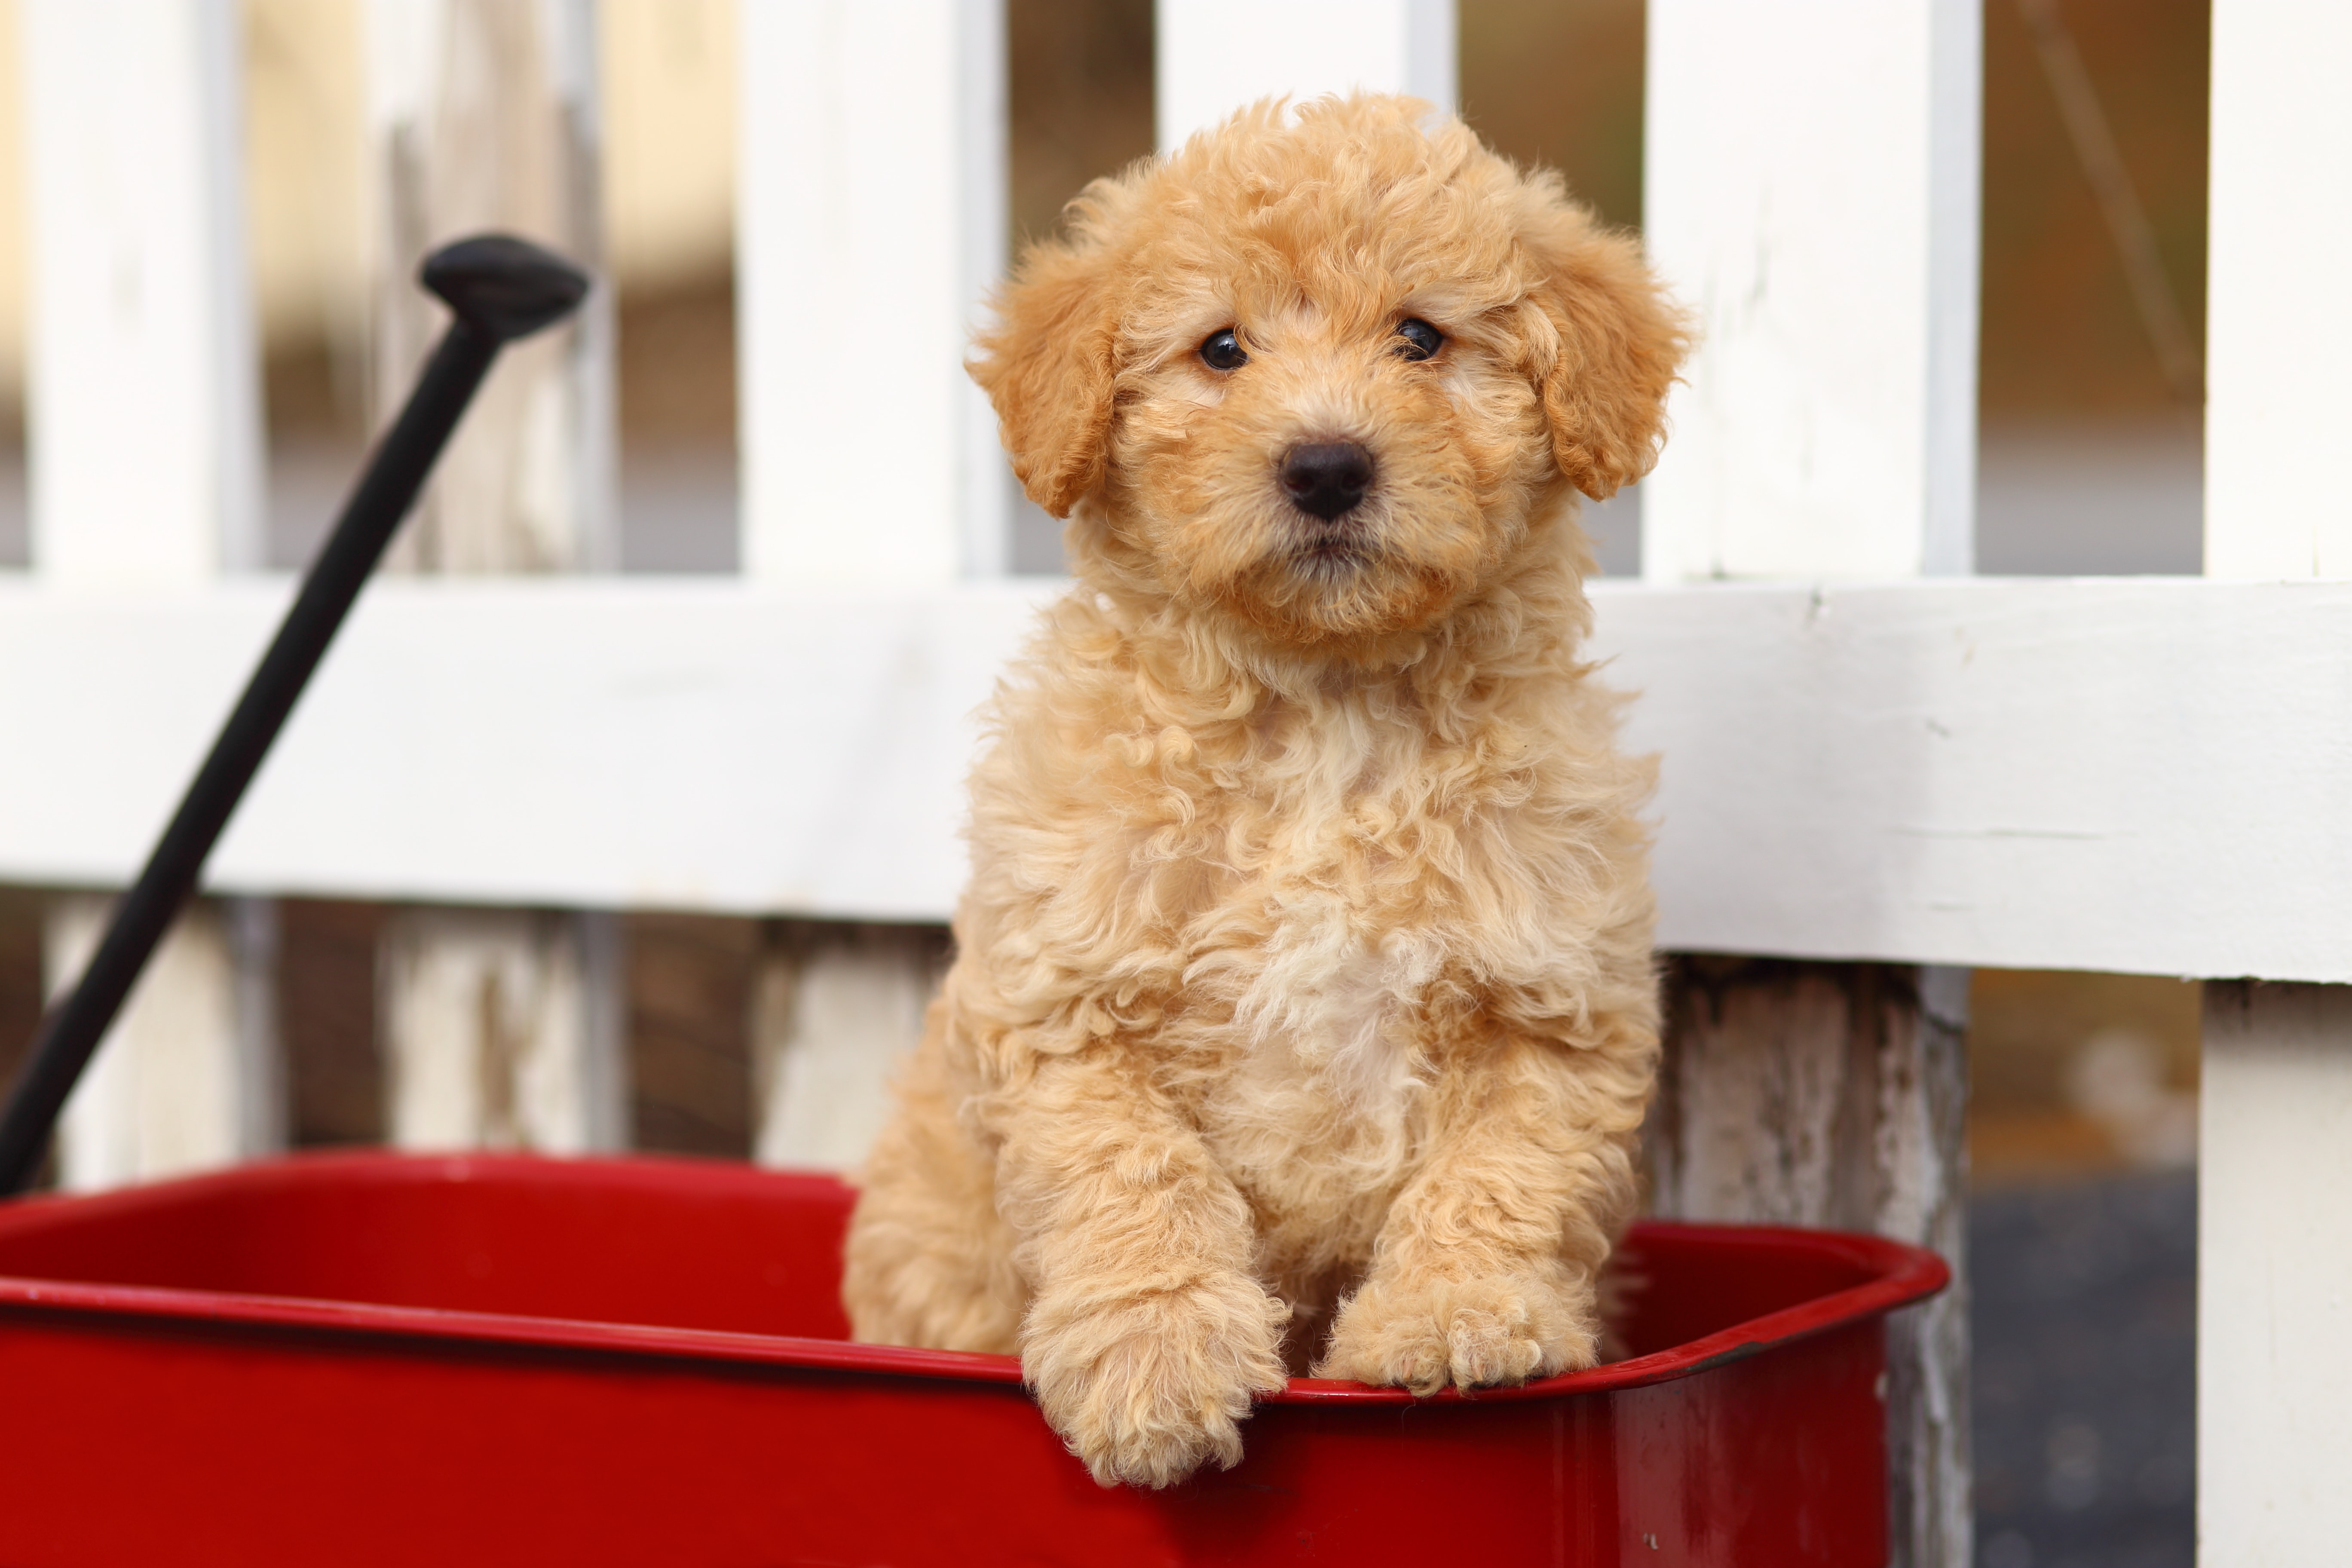 why are poodle mixes so popular?